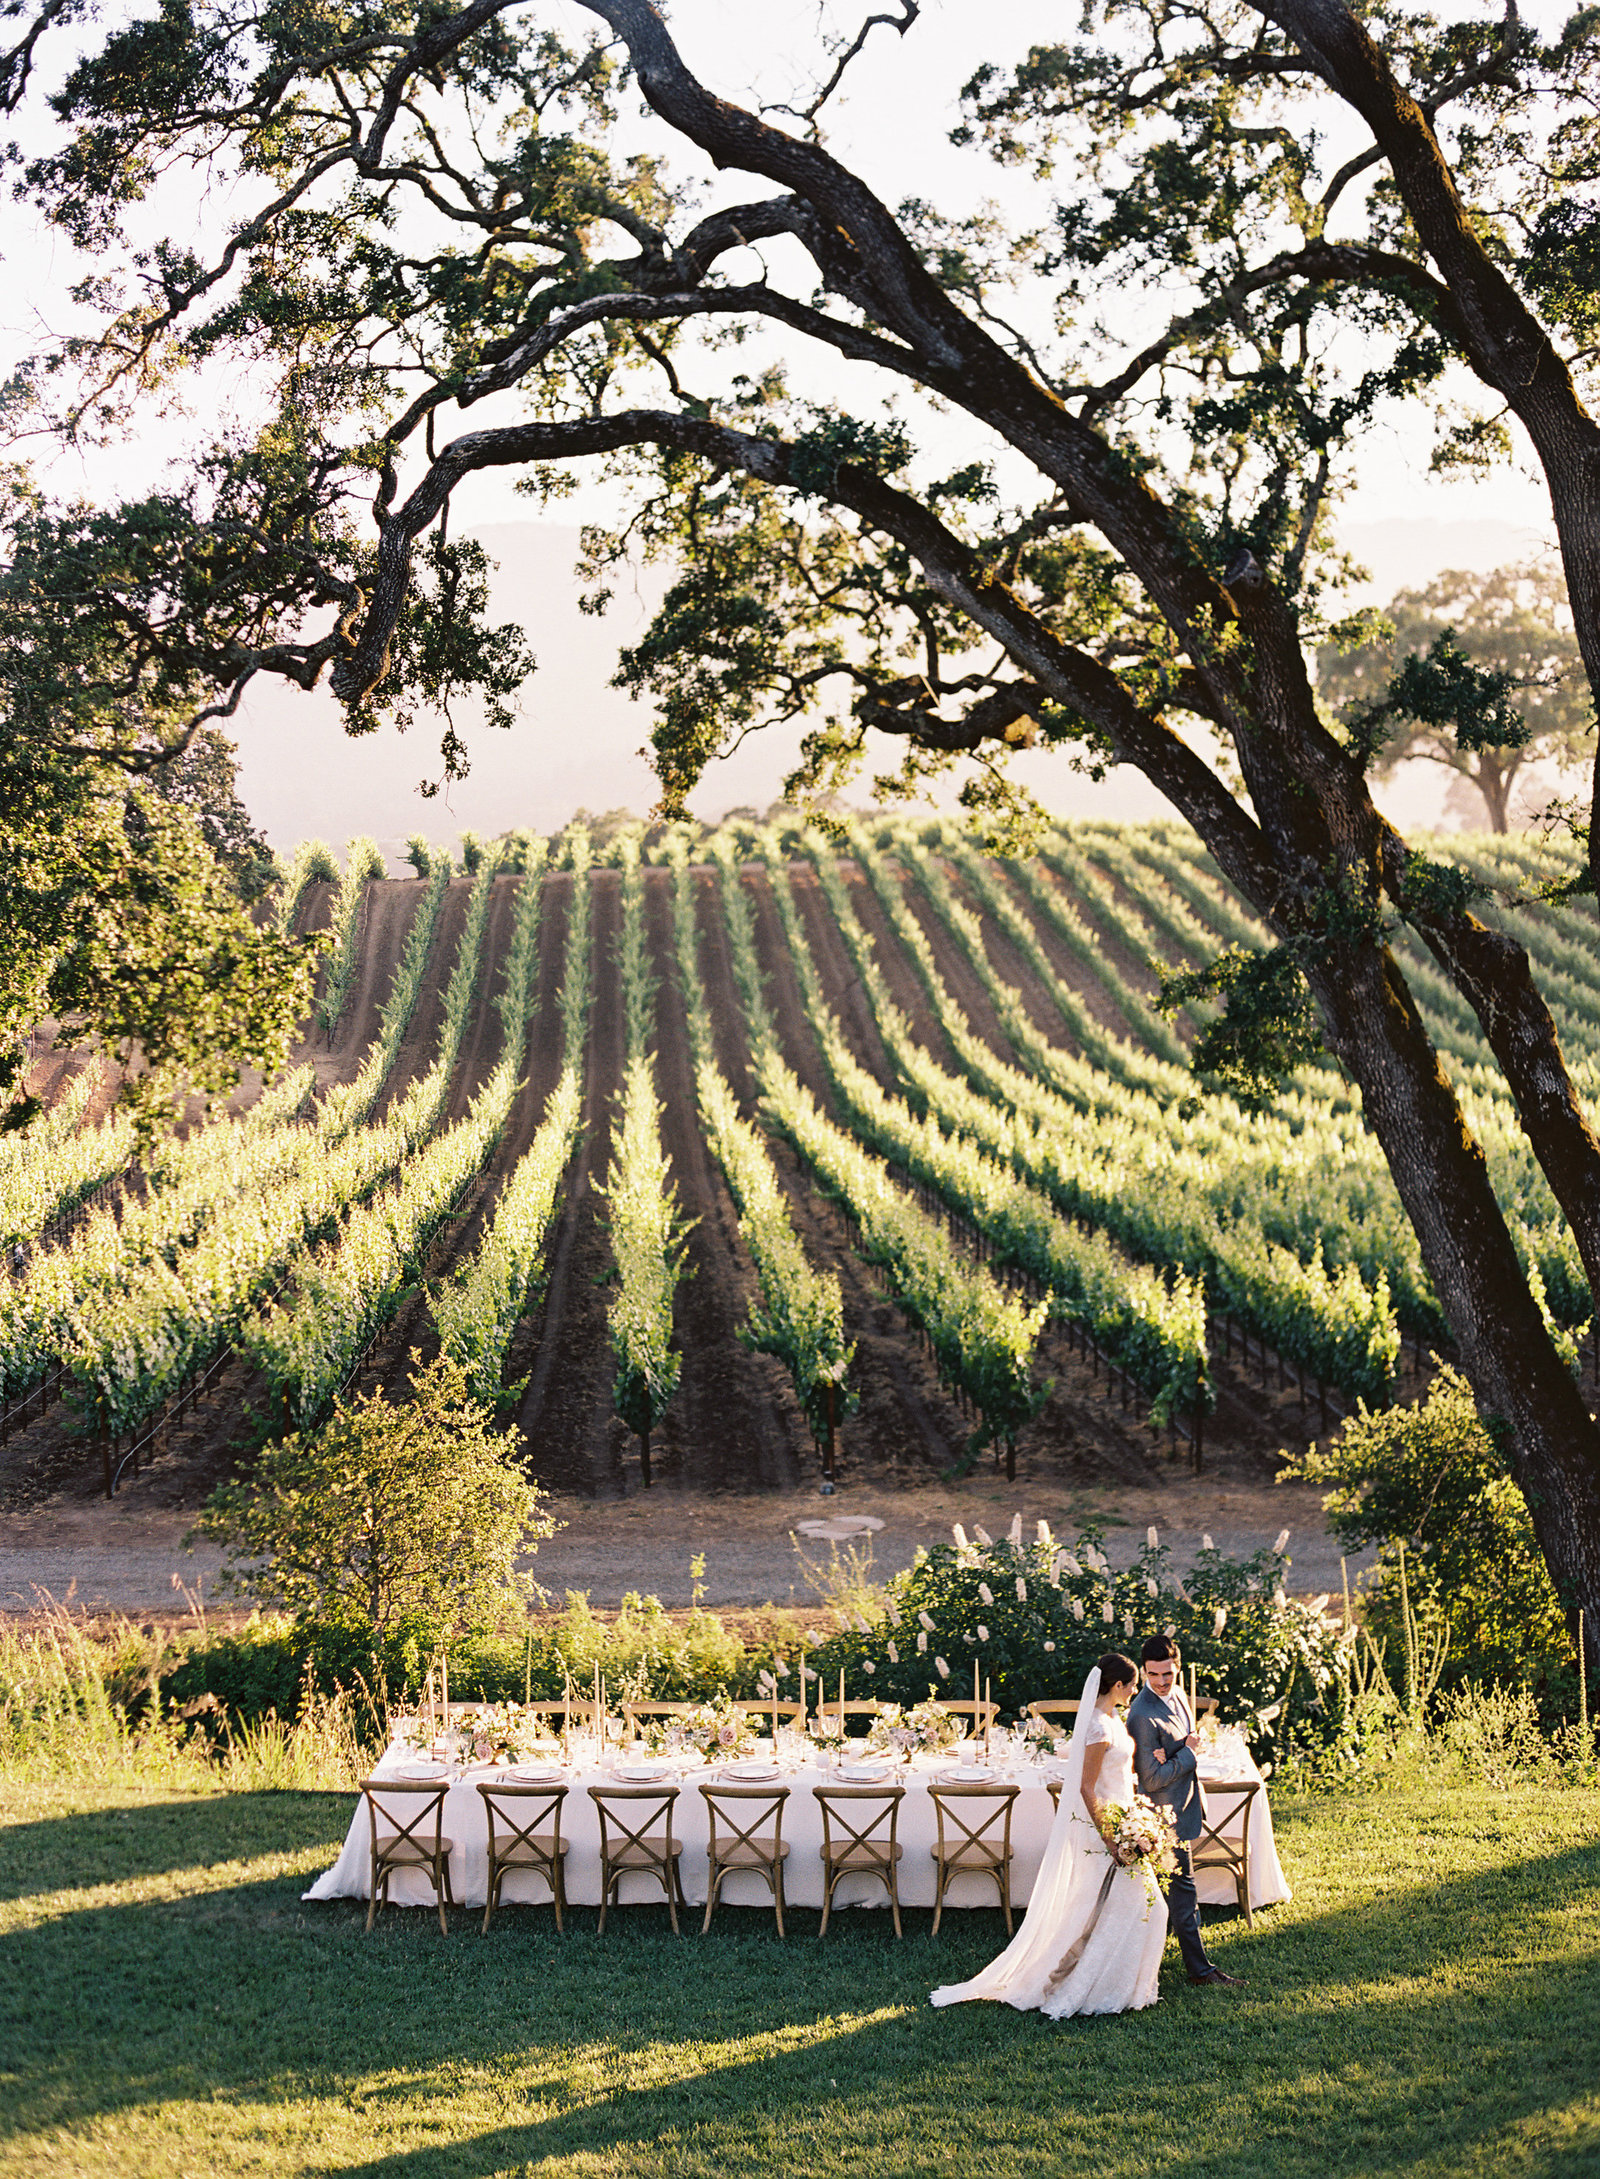 Wedding by Jenny Schneider Events in Napa Valley, California. Photo by Eric Kelley Photography.